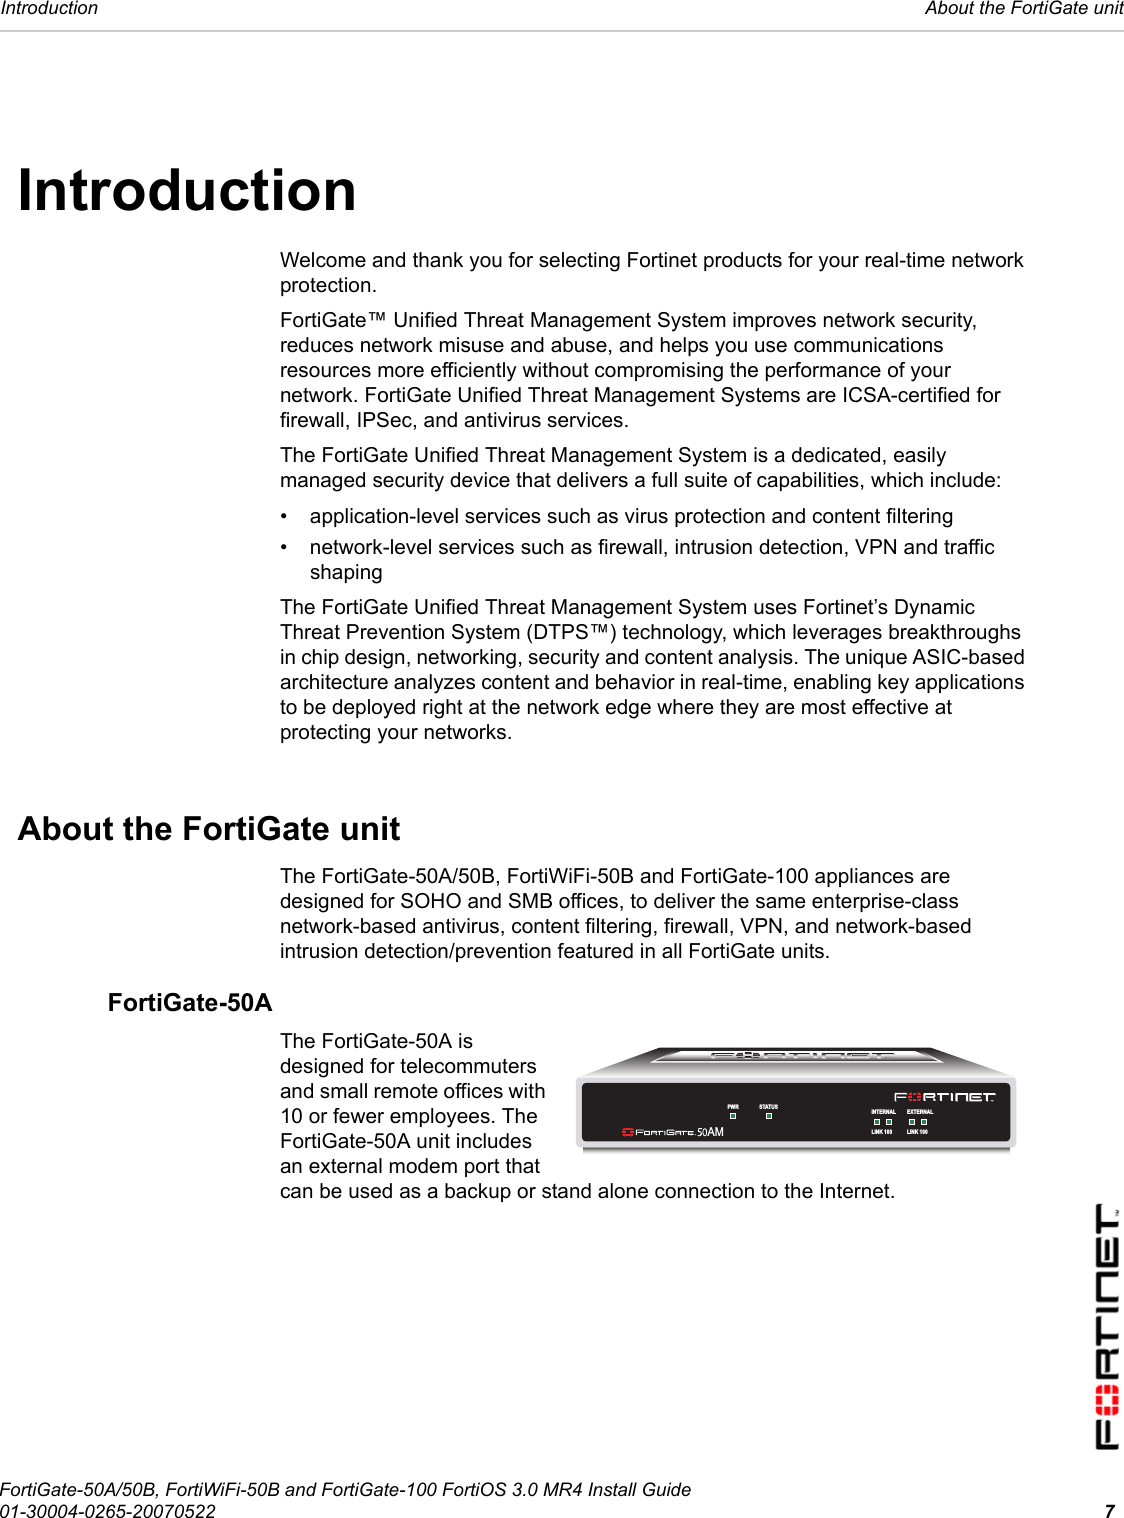 Introduction  About the FortiGate unitFortiGate-50A/50B, FortiWiFi-50B and FortiGate-100 FortiOS 3.0 MR4 Install Guide01-30004-0265-20070522 7IntroductionWelcome and thank you for selecting Fortinet products for your real-time network protection. FortiGate™ Unified Threat Management System improves network security, reduces network misuse and abuse, and helps you use communications resources more efficiently without compromising the performance of your network. FortiGate Unified Threat Management Systems are ICSA-certified for firewall, IPSec, and antivirus services.The FortiGate Unified Threat Management System is a dedicated, easily managed security device that delivers a full suite of capabilities, which include:• application-level services such as virus protection and content filtering• network-level services such as firewall, intrusion detection, VPN and traffic shapingThe FortiGate Unified Threat Management System uses Fortinet’s Dynamic Threat Prevention System (DTPS™) technology, which leverages breakthroughs in chip design, networking, security and content analysis. The unique ASIC-based architecture analyzes content and behavior in real-time, enabling key applications to be deployed right at the network edge where they are most effective at protecting your networks.About the FortiGate unitThe FortiGate-50A/50B, FortiWiFi-50B and FortiGate-100 appliances are designed for SOHO and SMB offices, to deliver the same enterprise-class network-based antivirus, content filtering, firewall, VPN, and network-based intrusion detection/prevention featured in all FortiGate units.FortiGate-50AThe FortiGate-50A is designed for telecommuters and small remote offices with 10 or fewer employees. The FortiGate-50A unit includes an external modem port that can be used as a backup or stand alone connection to the Internet.INTERNAL EXTERNALLINK 100 LINK 100PWR STATUSAM